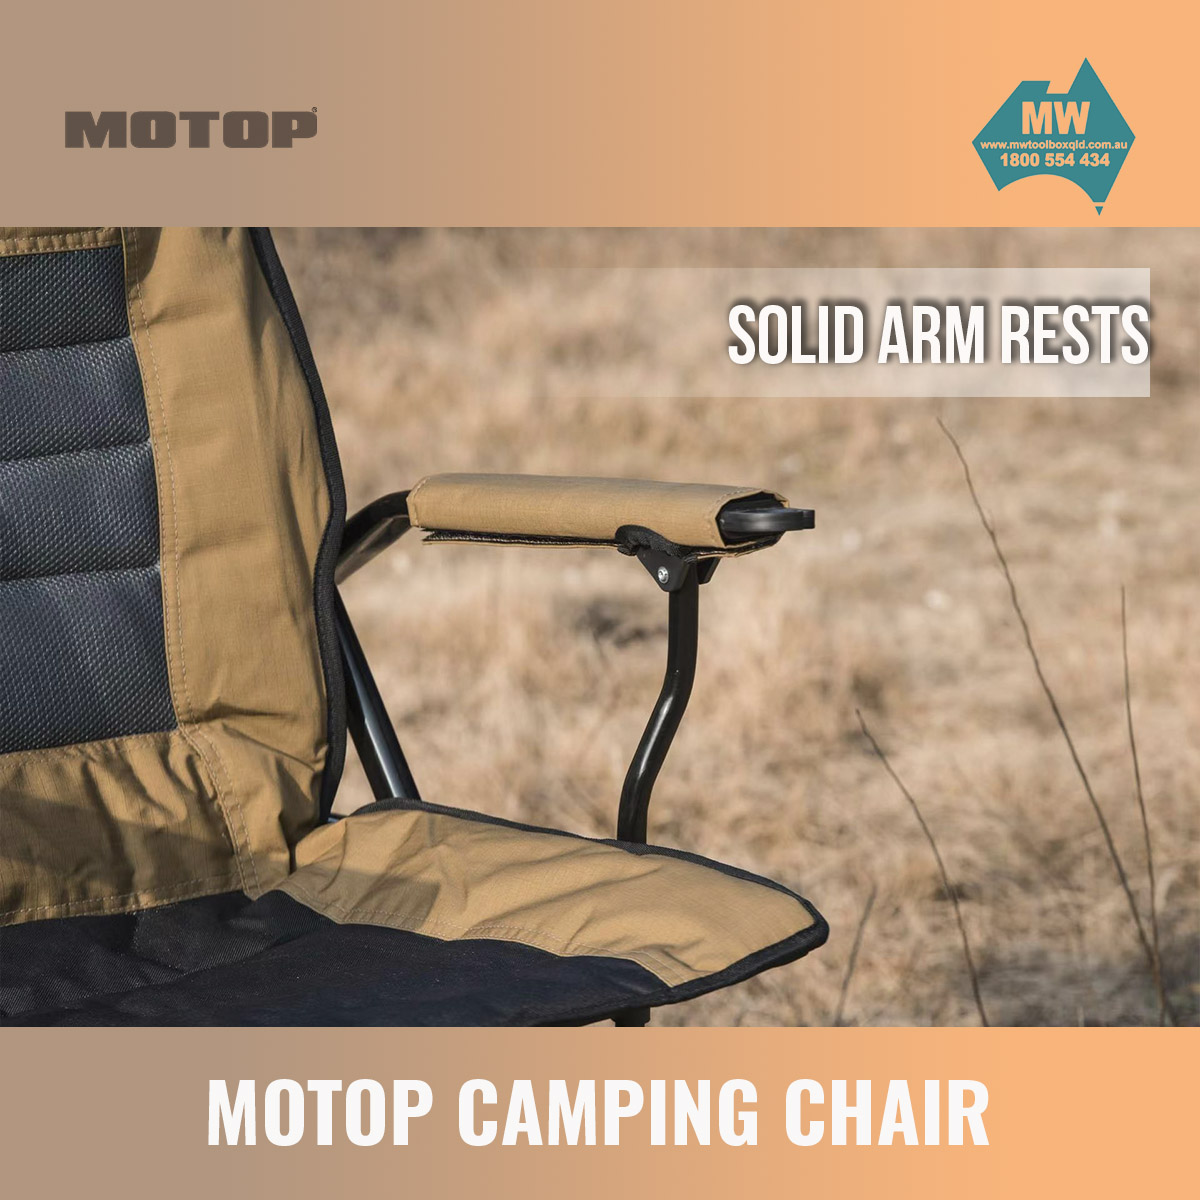 Motop-Camping-Chair-5